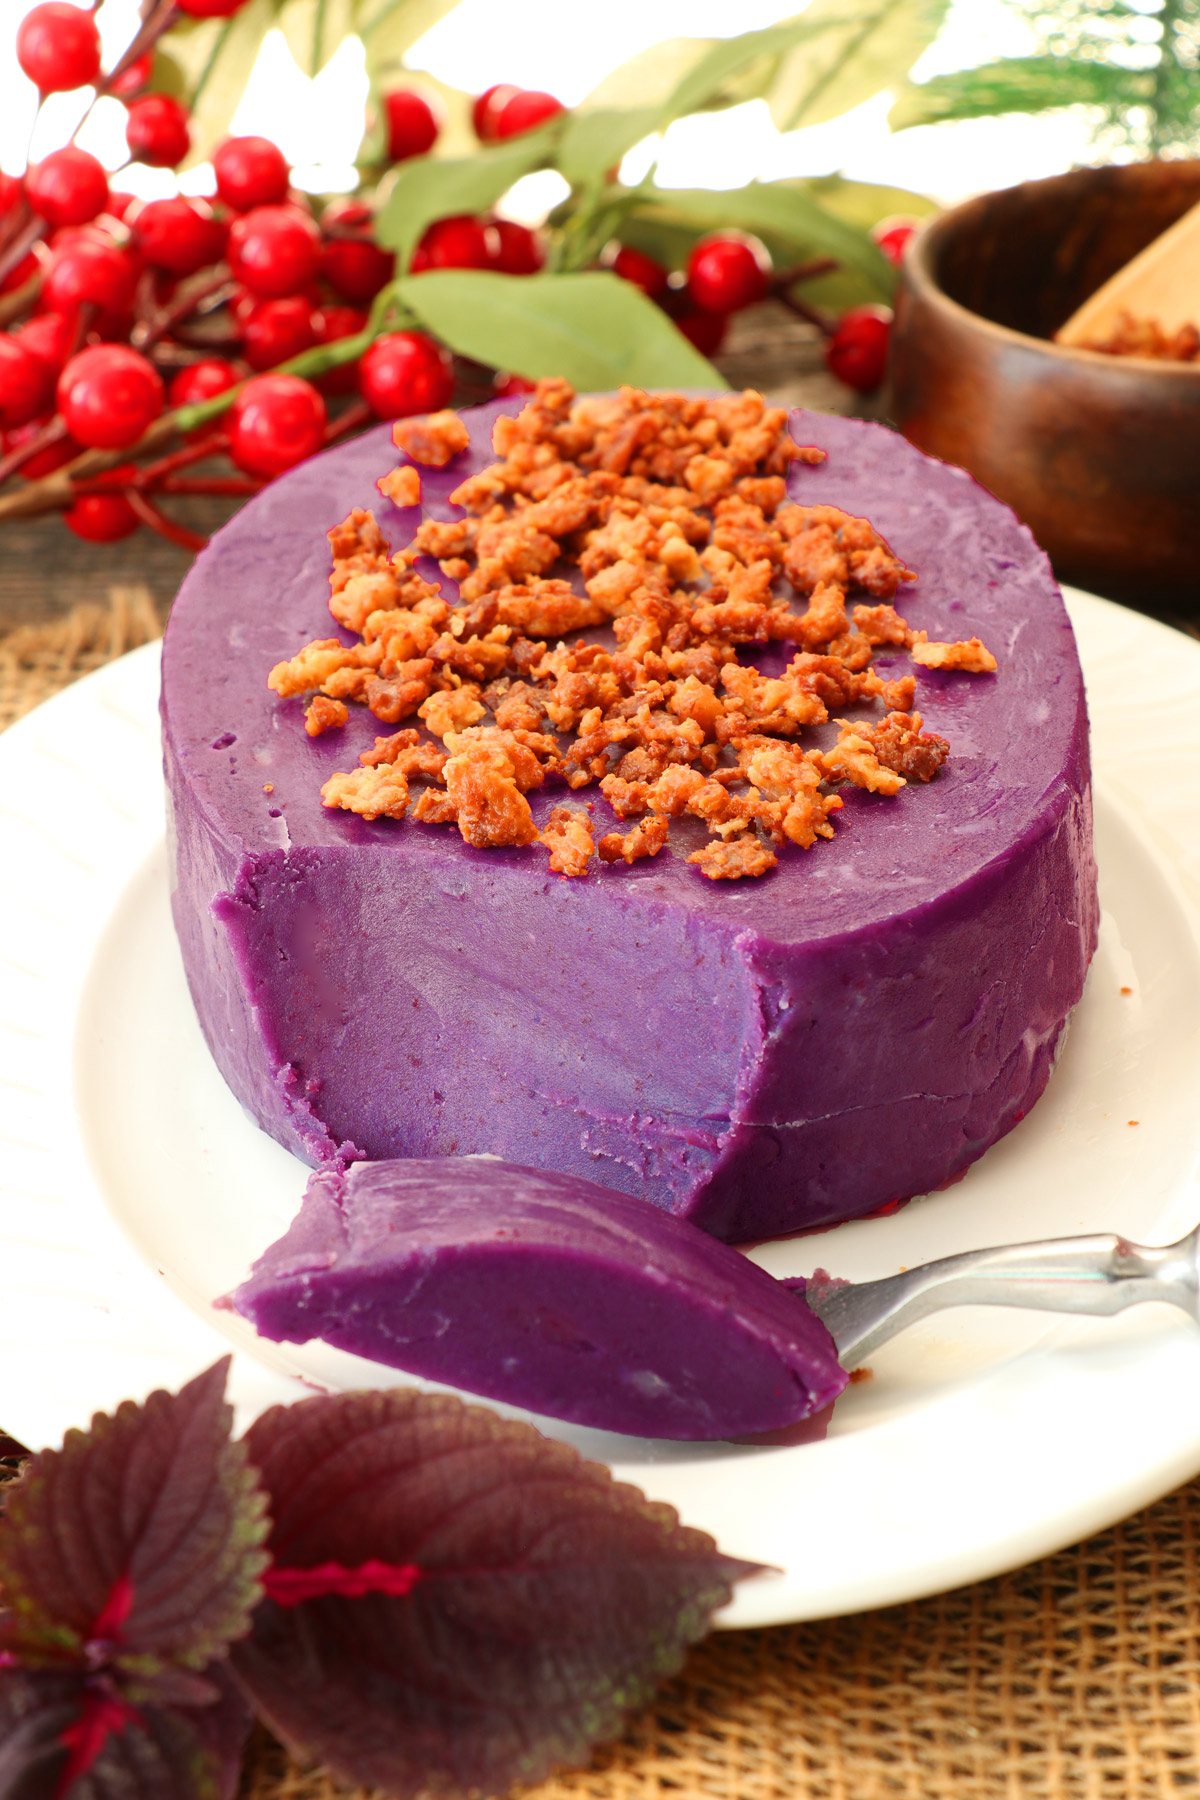 Purple Yam or Ube Jam with Coconut Curds toppings.